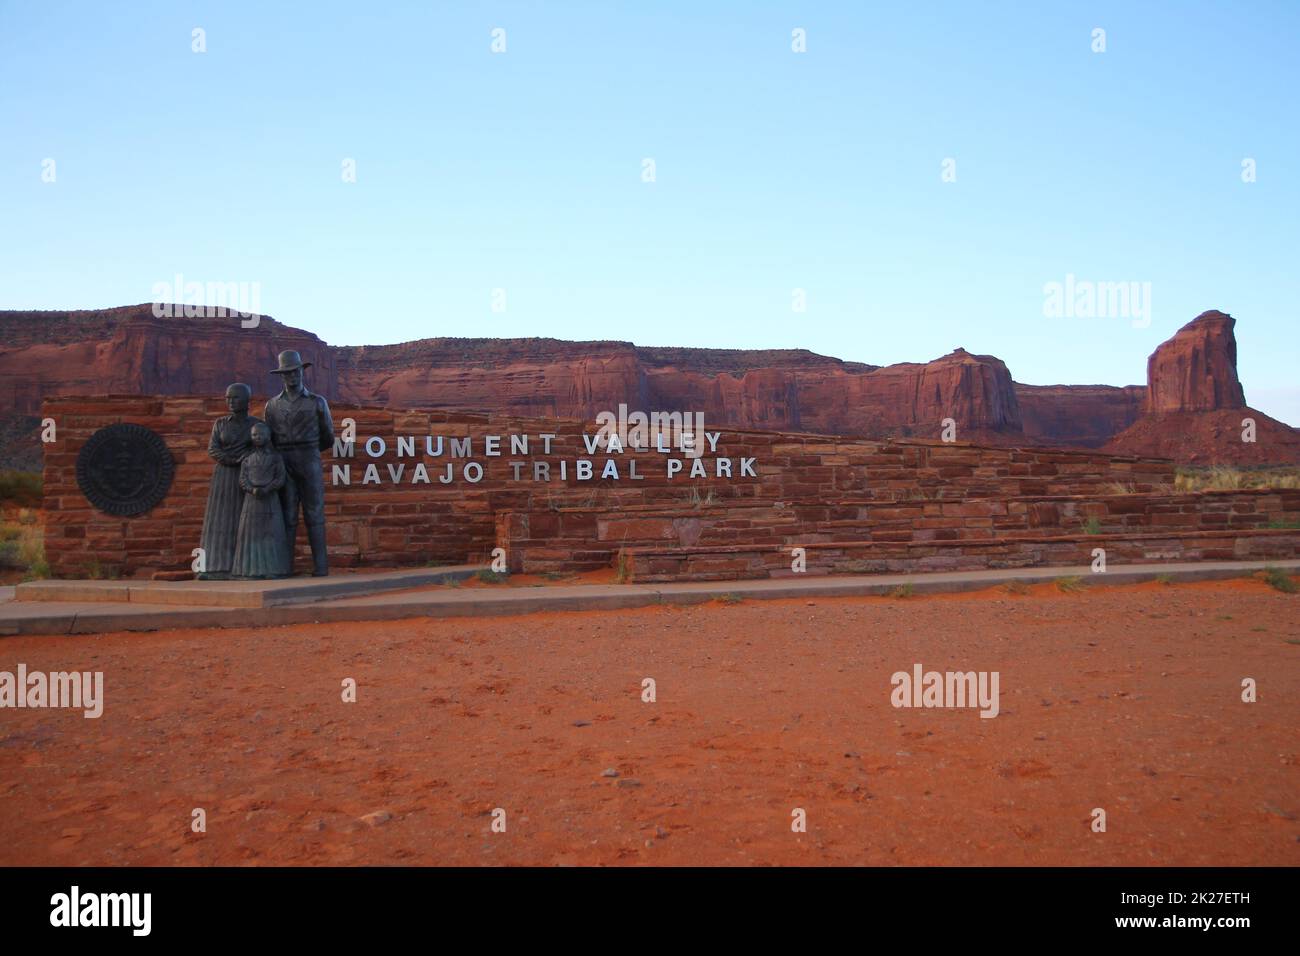 Monument Valley Navajo Tribal Park traditional sign Stock Photo